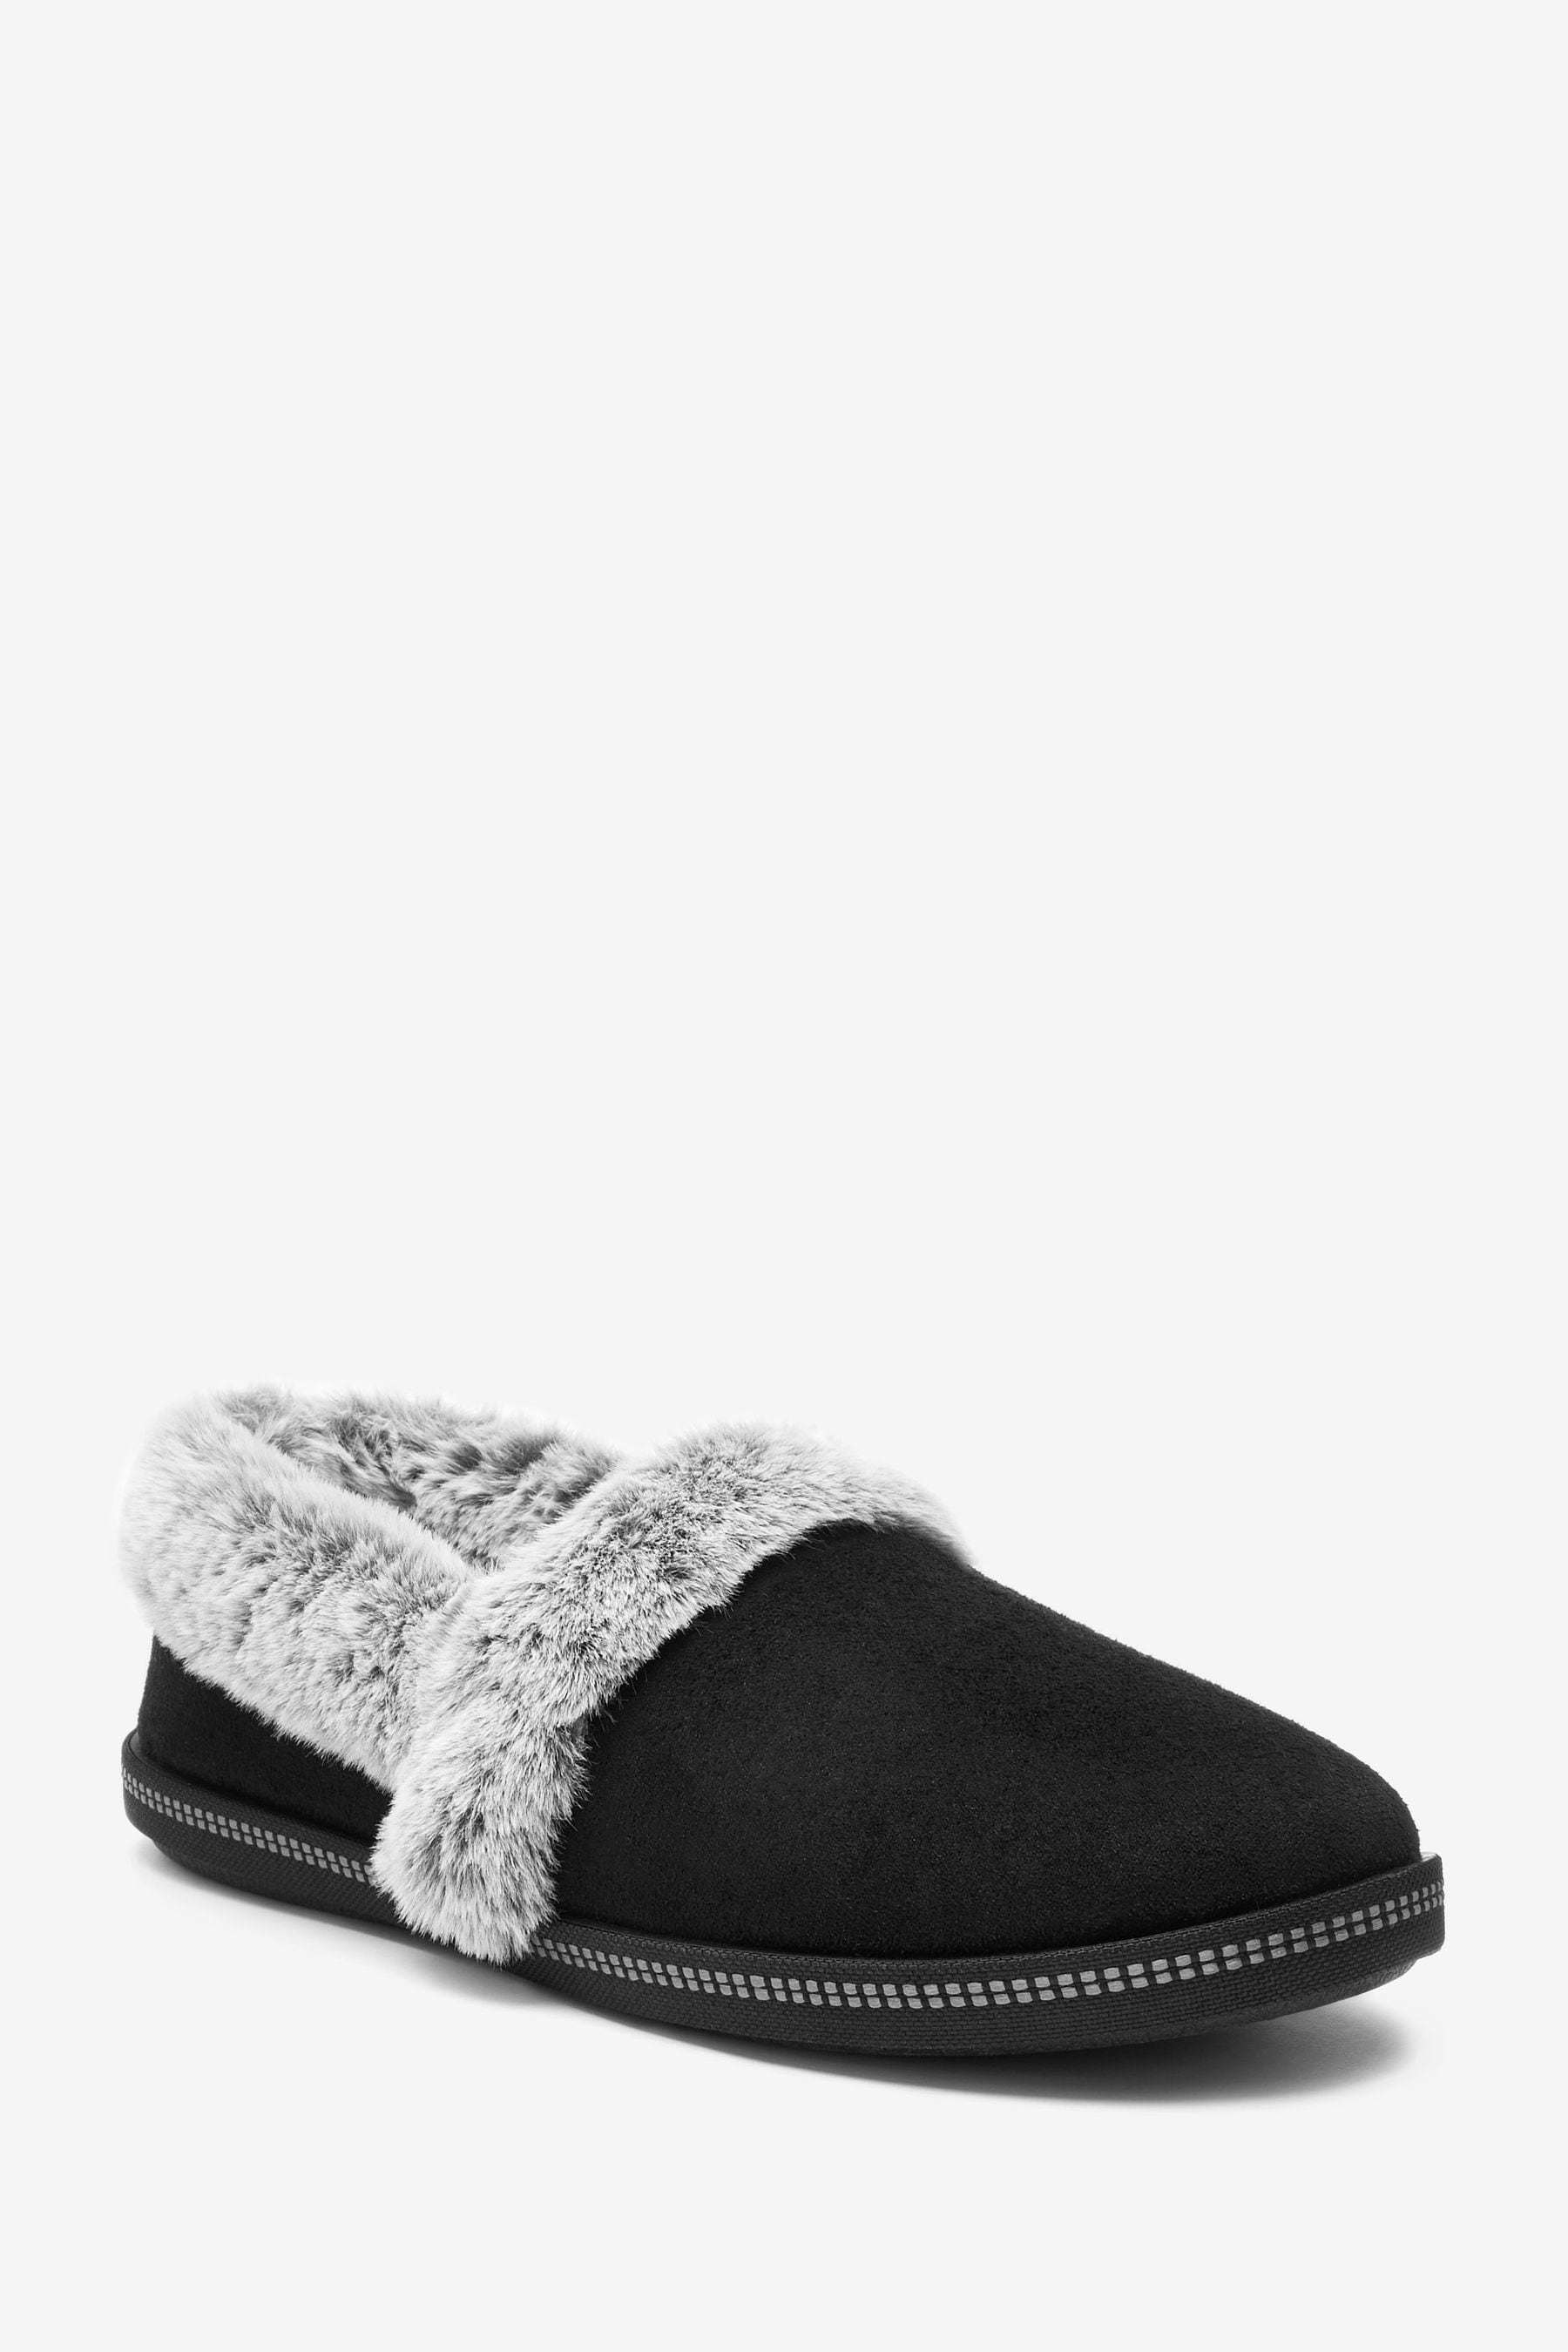 Skechers Black Cosy Campfire Slippers | J D Williams